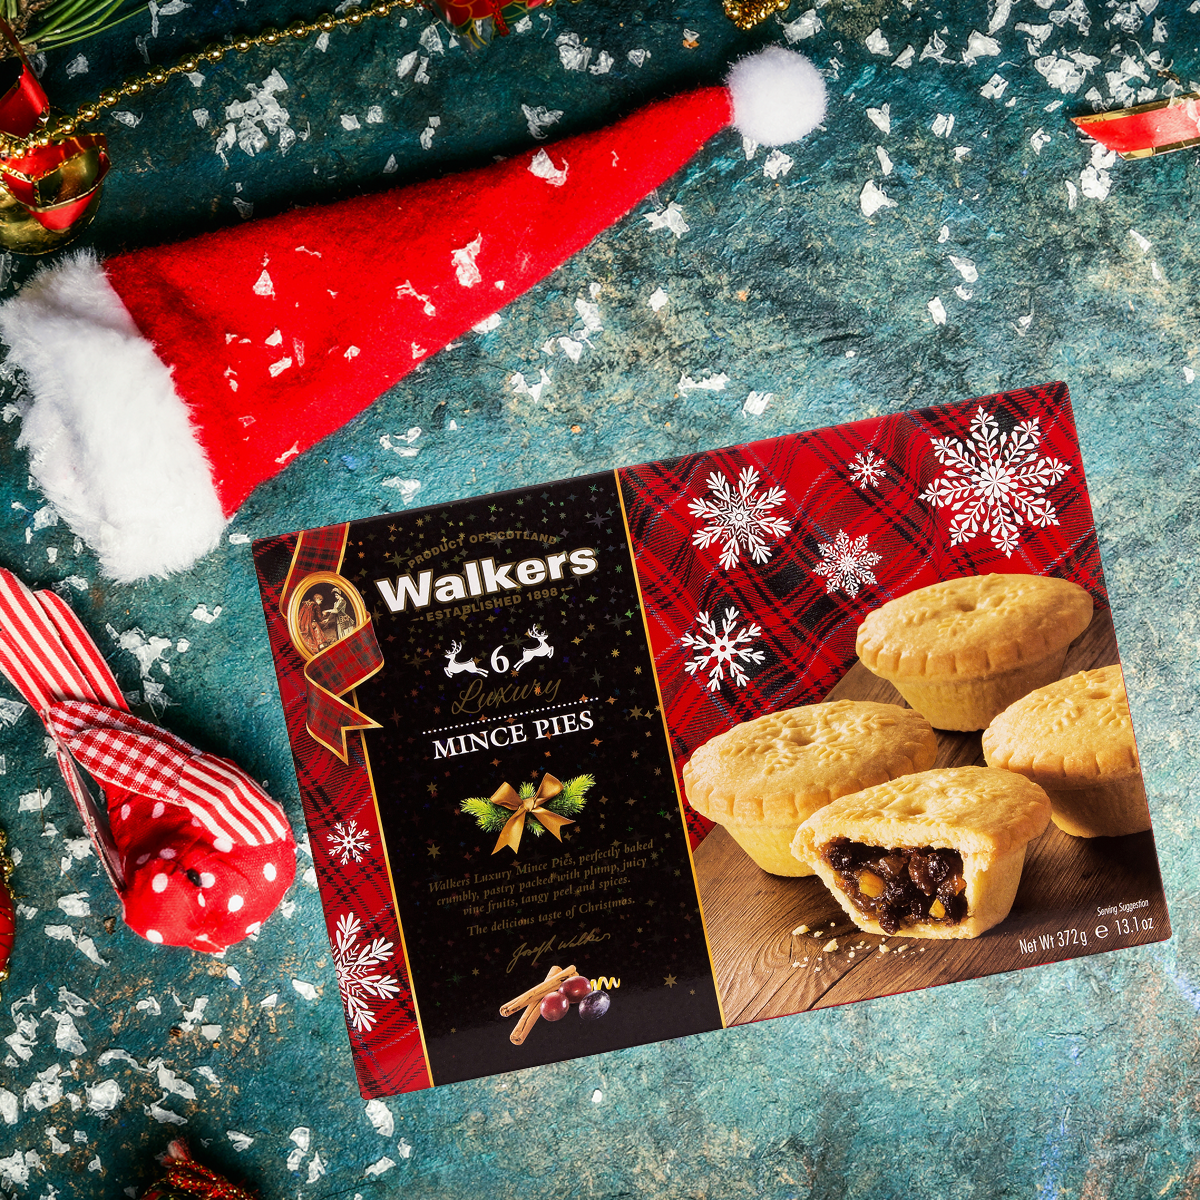 https://www.walkersshortbread.com/product_images/uploaded_images/Mince_Pies_1200_1200.png